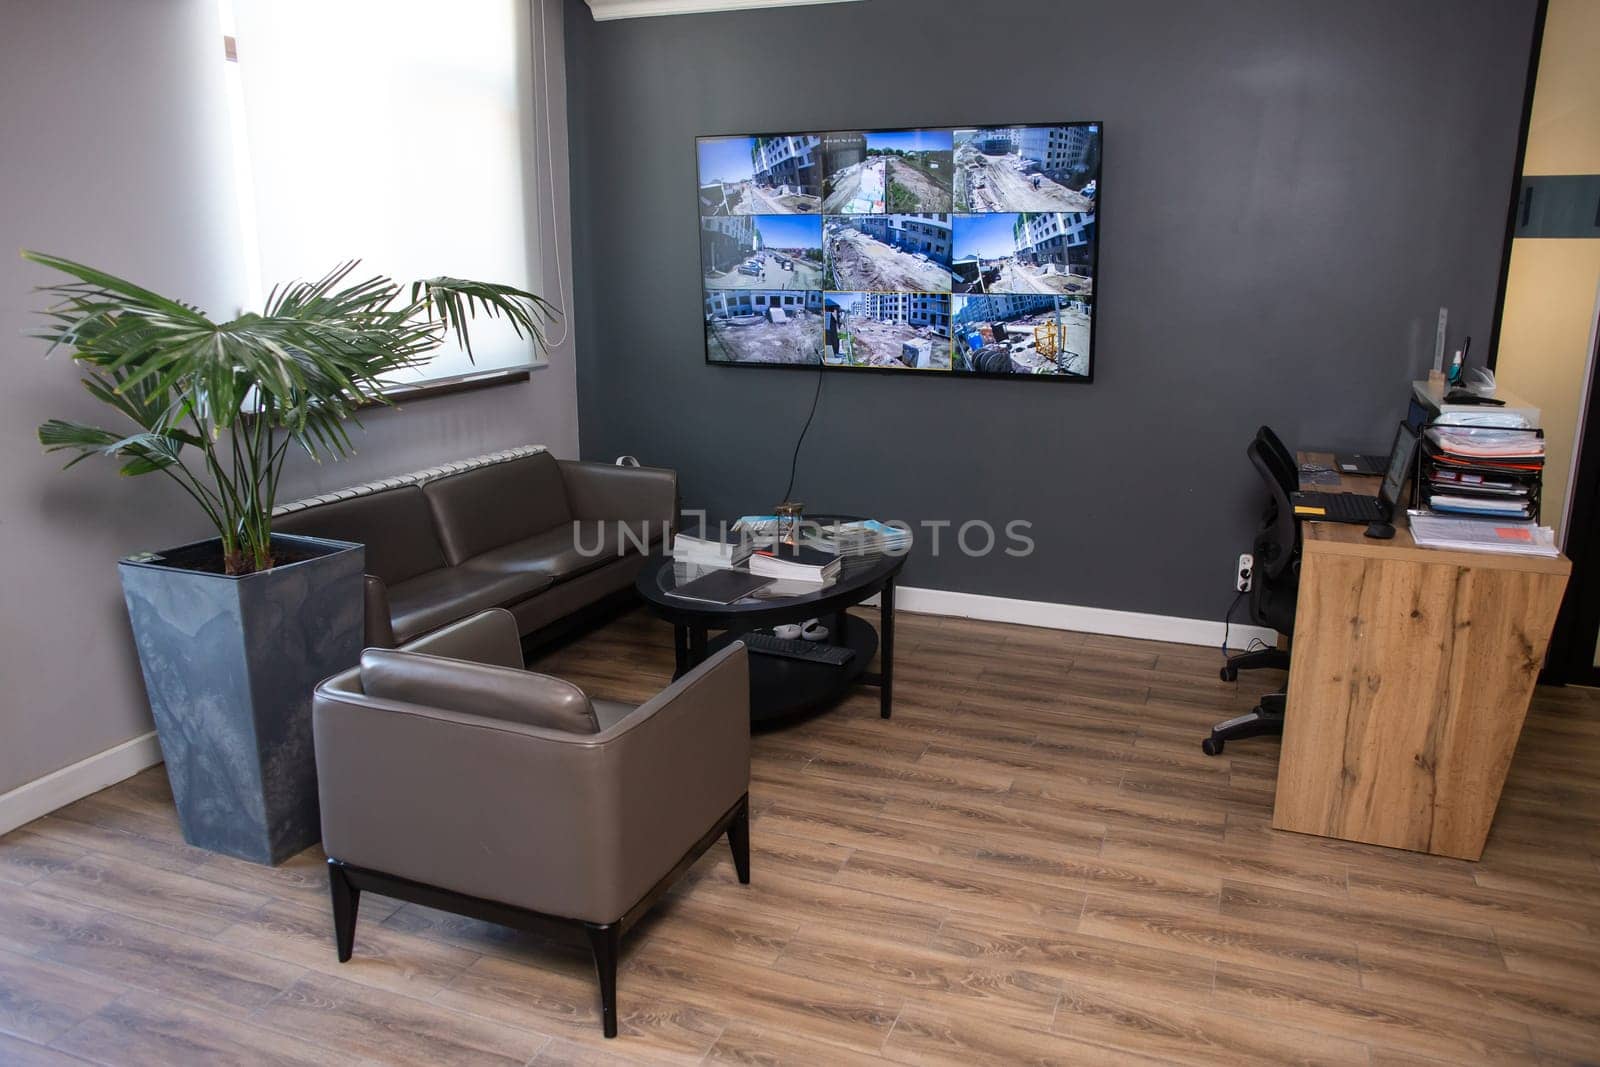 A stylish and modern office interior with dark gray walls, a large window and a monitor on the wall. comfortable leather furniture.